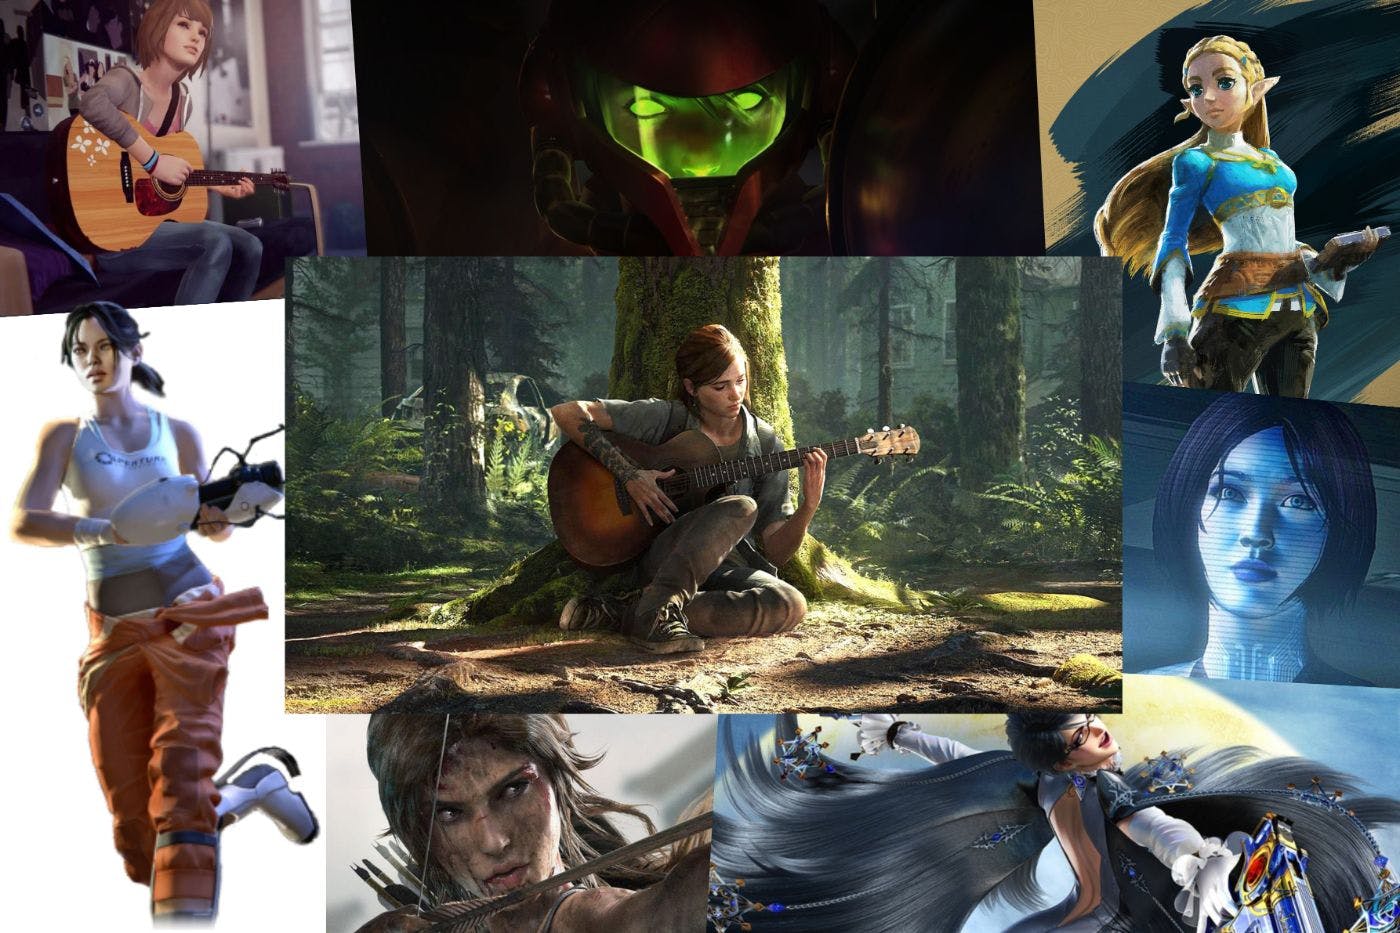 The DeanBeat: Favorite female game characters that aren't an